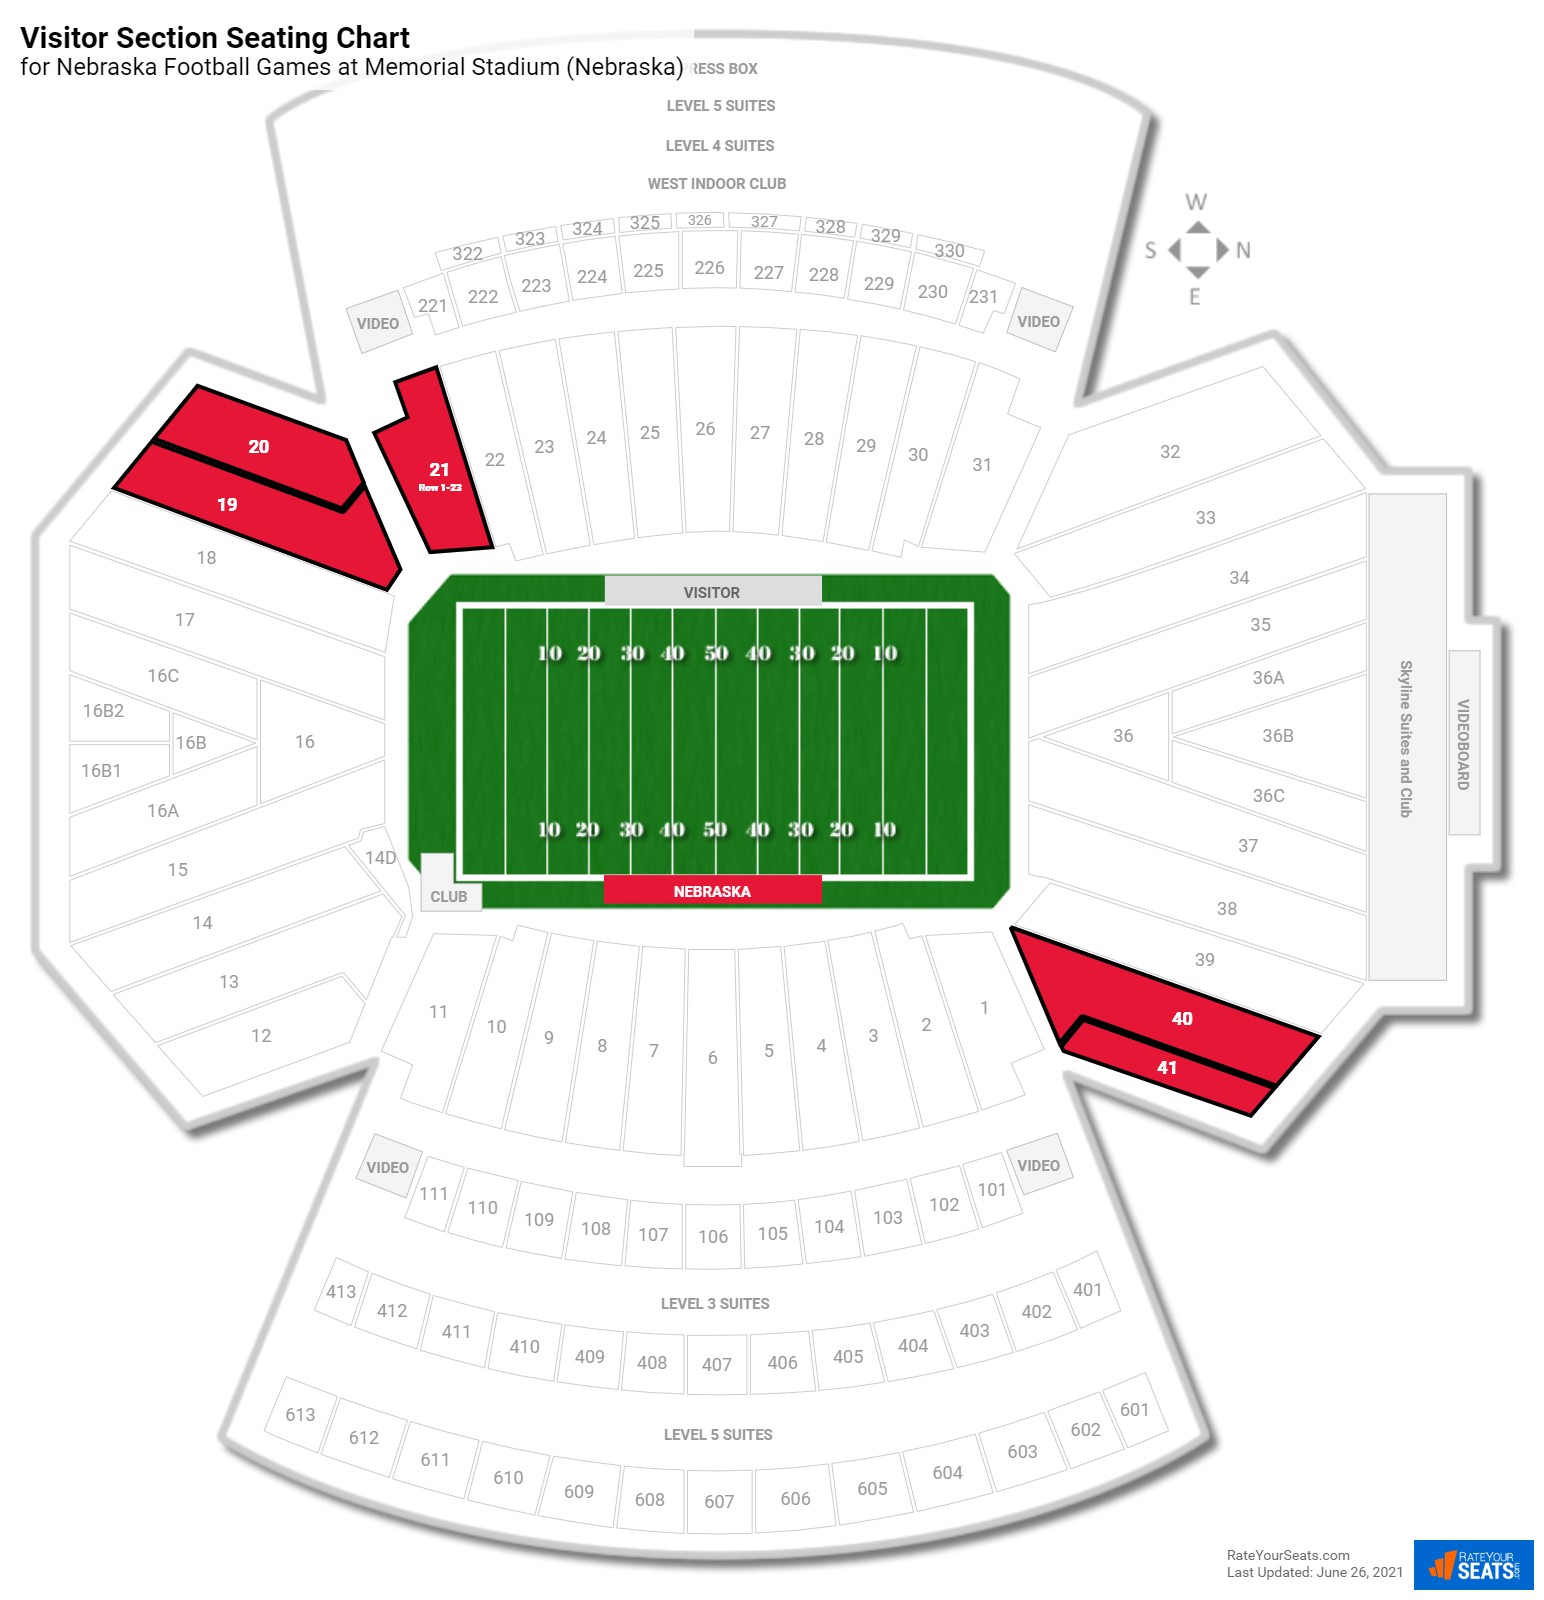 Nebraska Memorial Stadium Seating Chart With Rows Review Home Decor